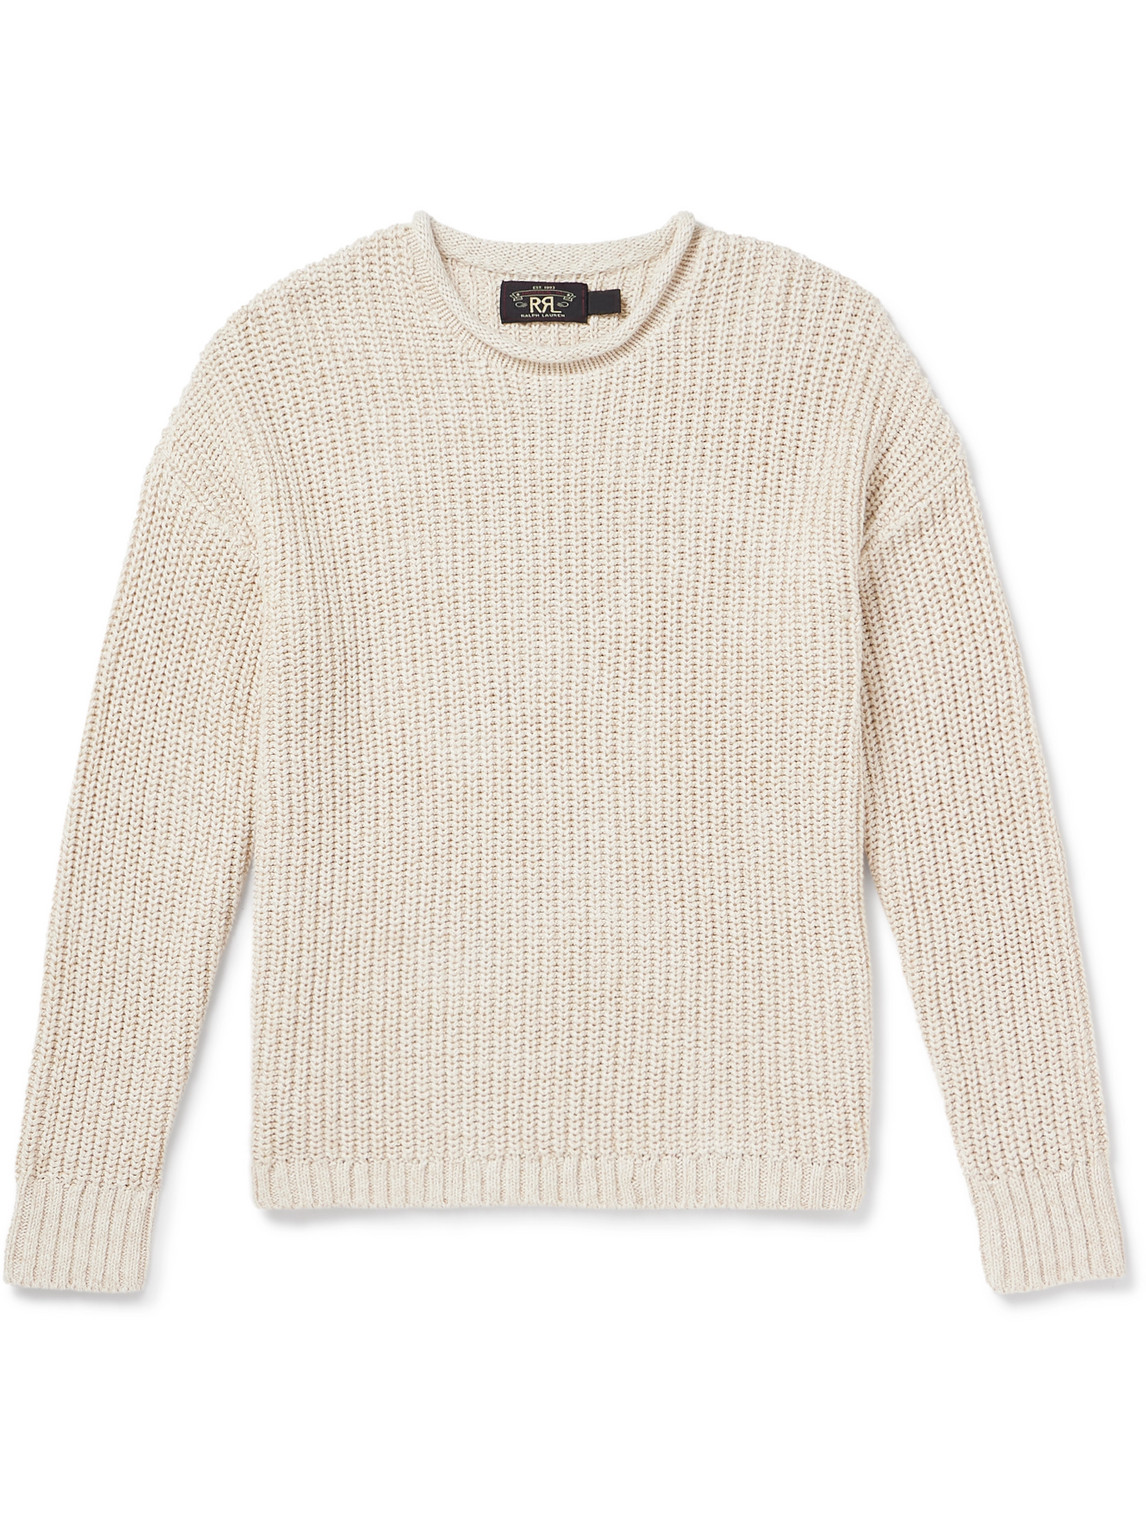 Rrl Ribbed Linen And Cotton-blend Jumper In White